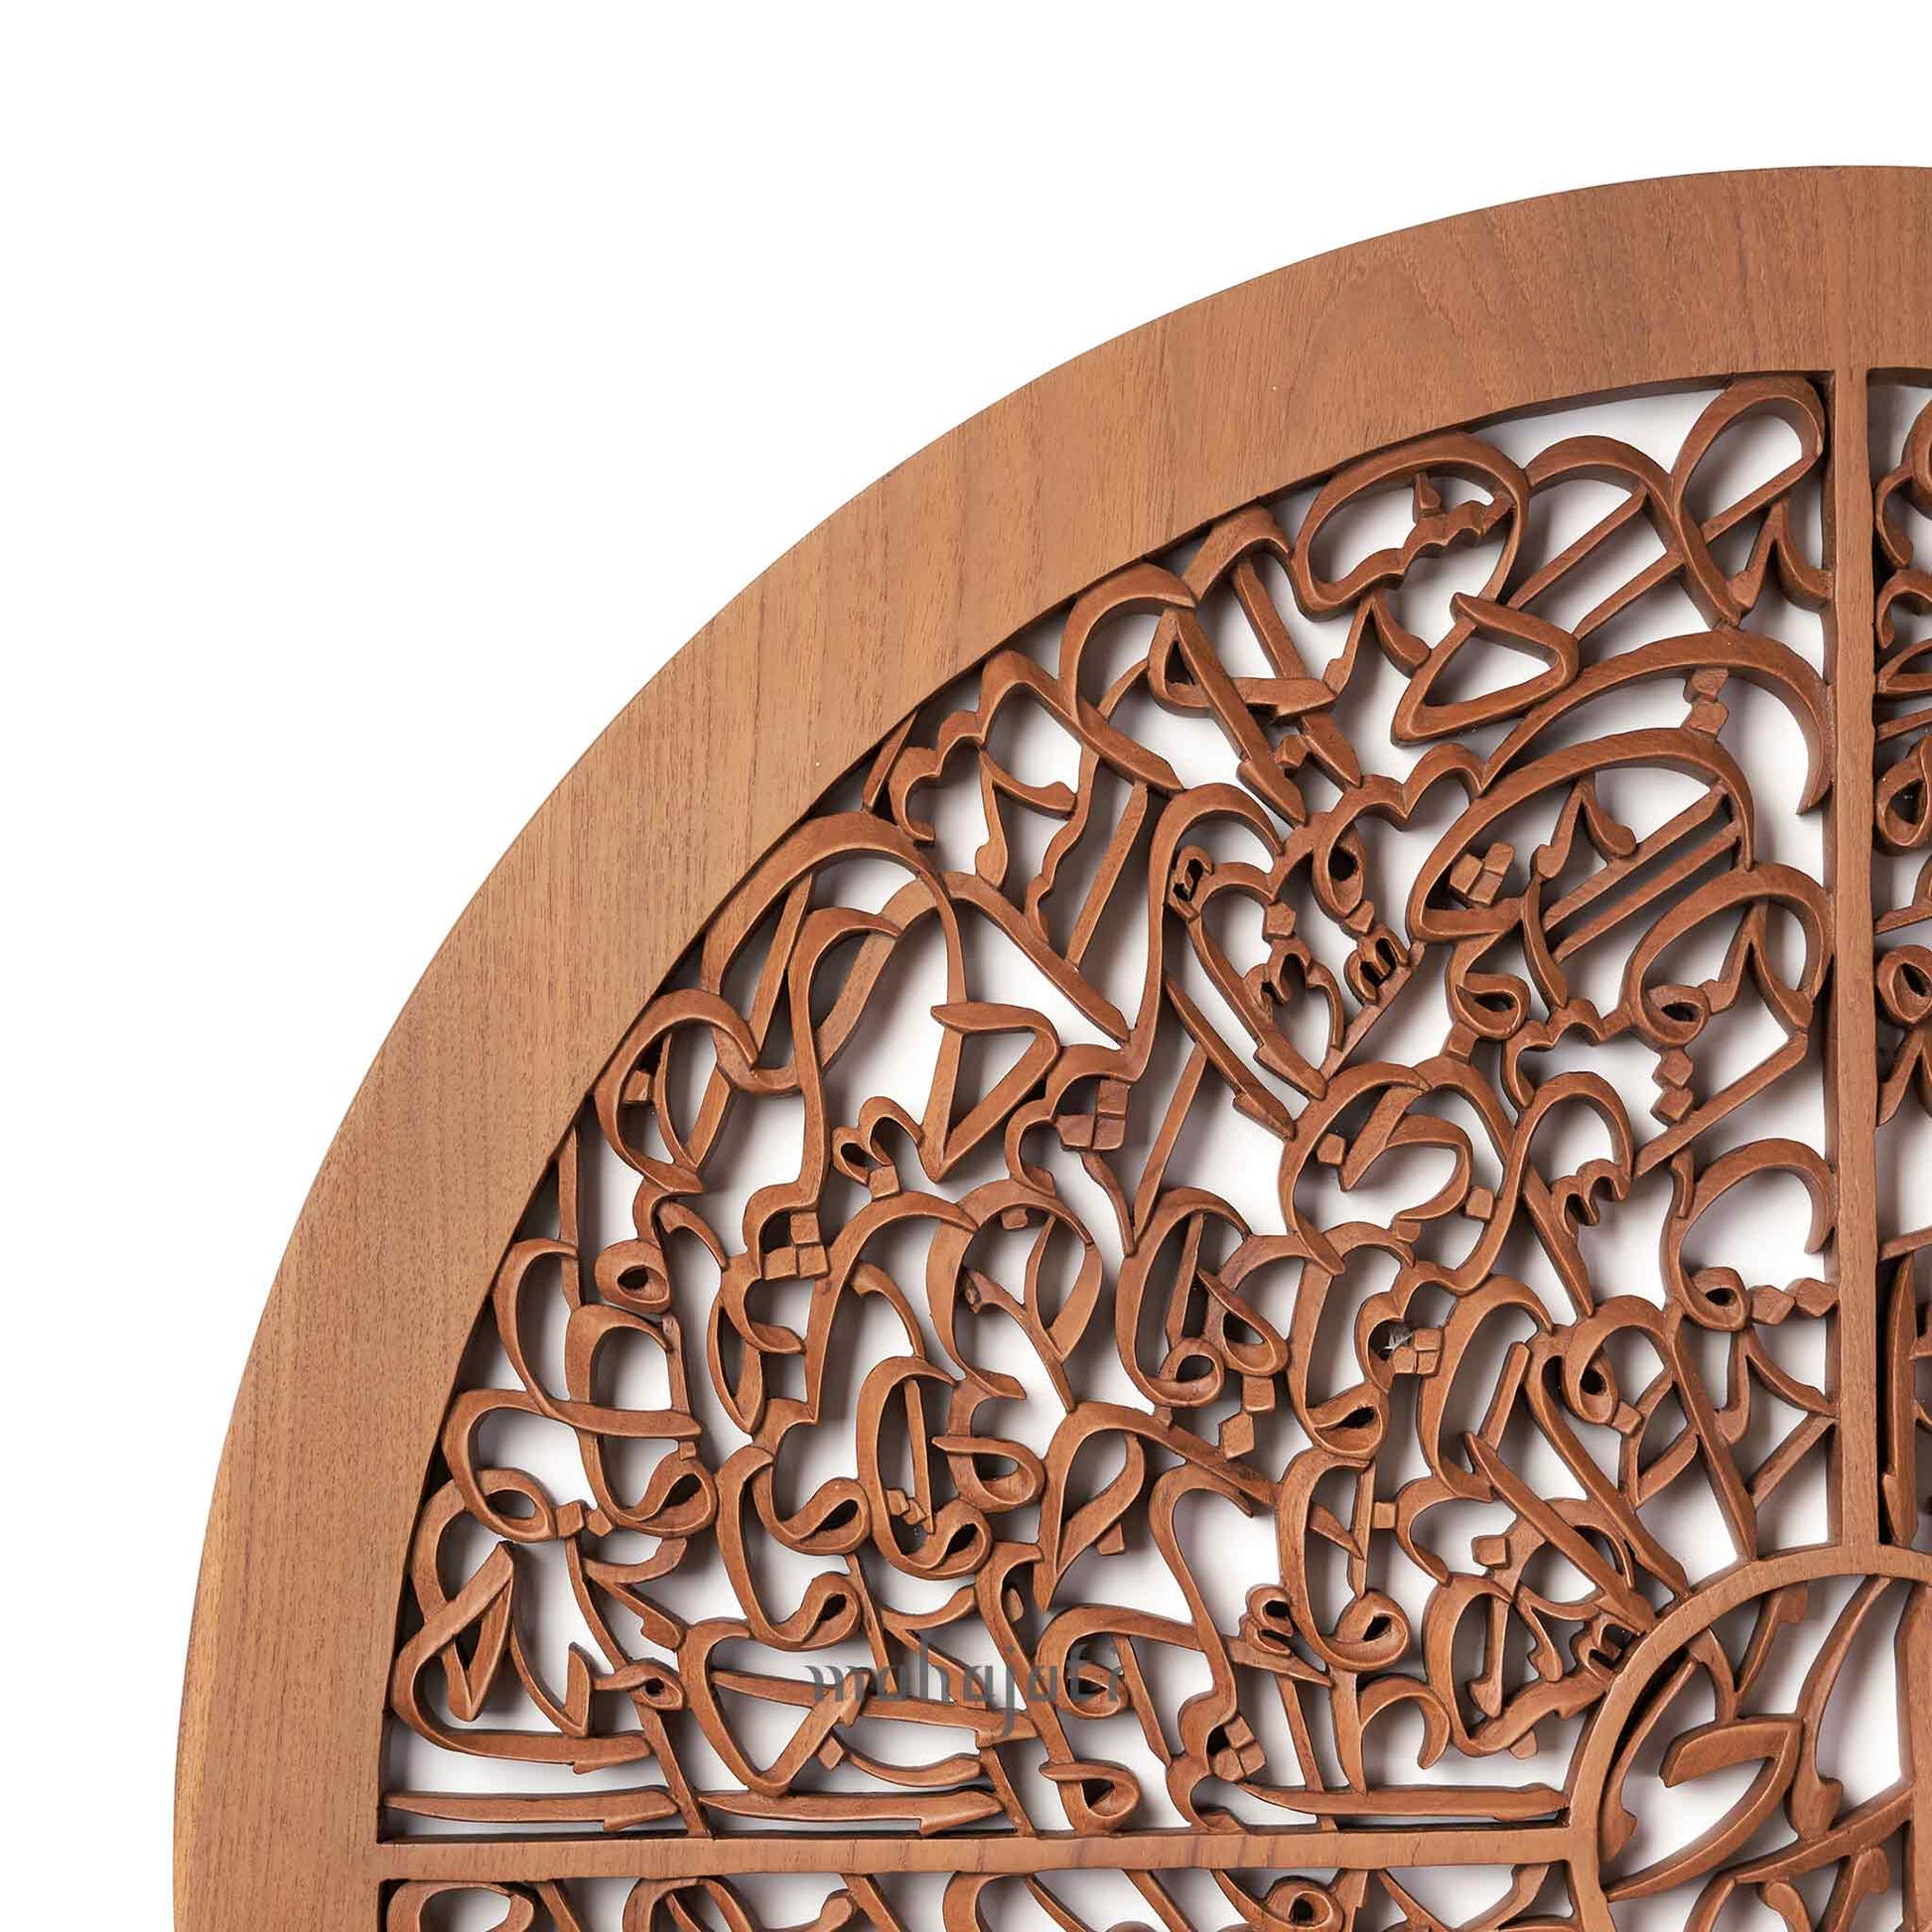 Islamic calligraphy wall decor of 4 Qul, hand-carved from premium teak wood. It is ideal for muslim home decoration or for gifts.